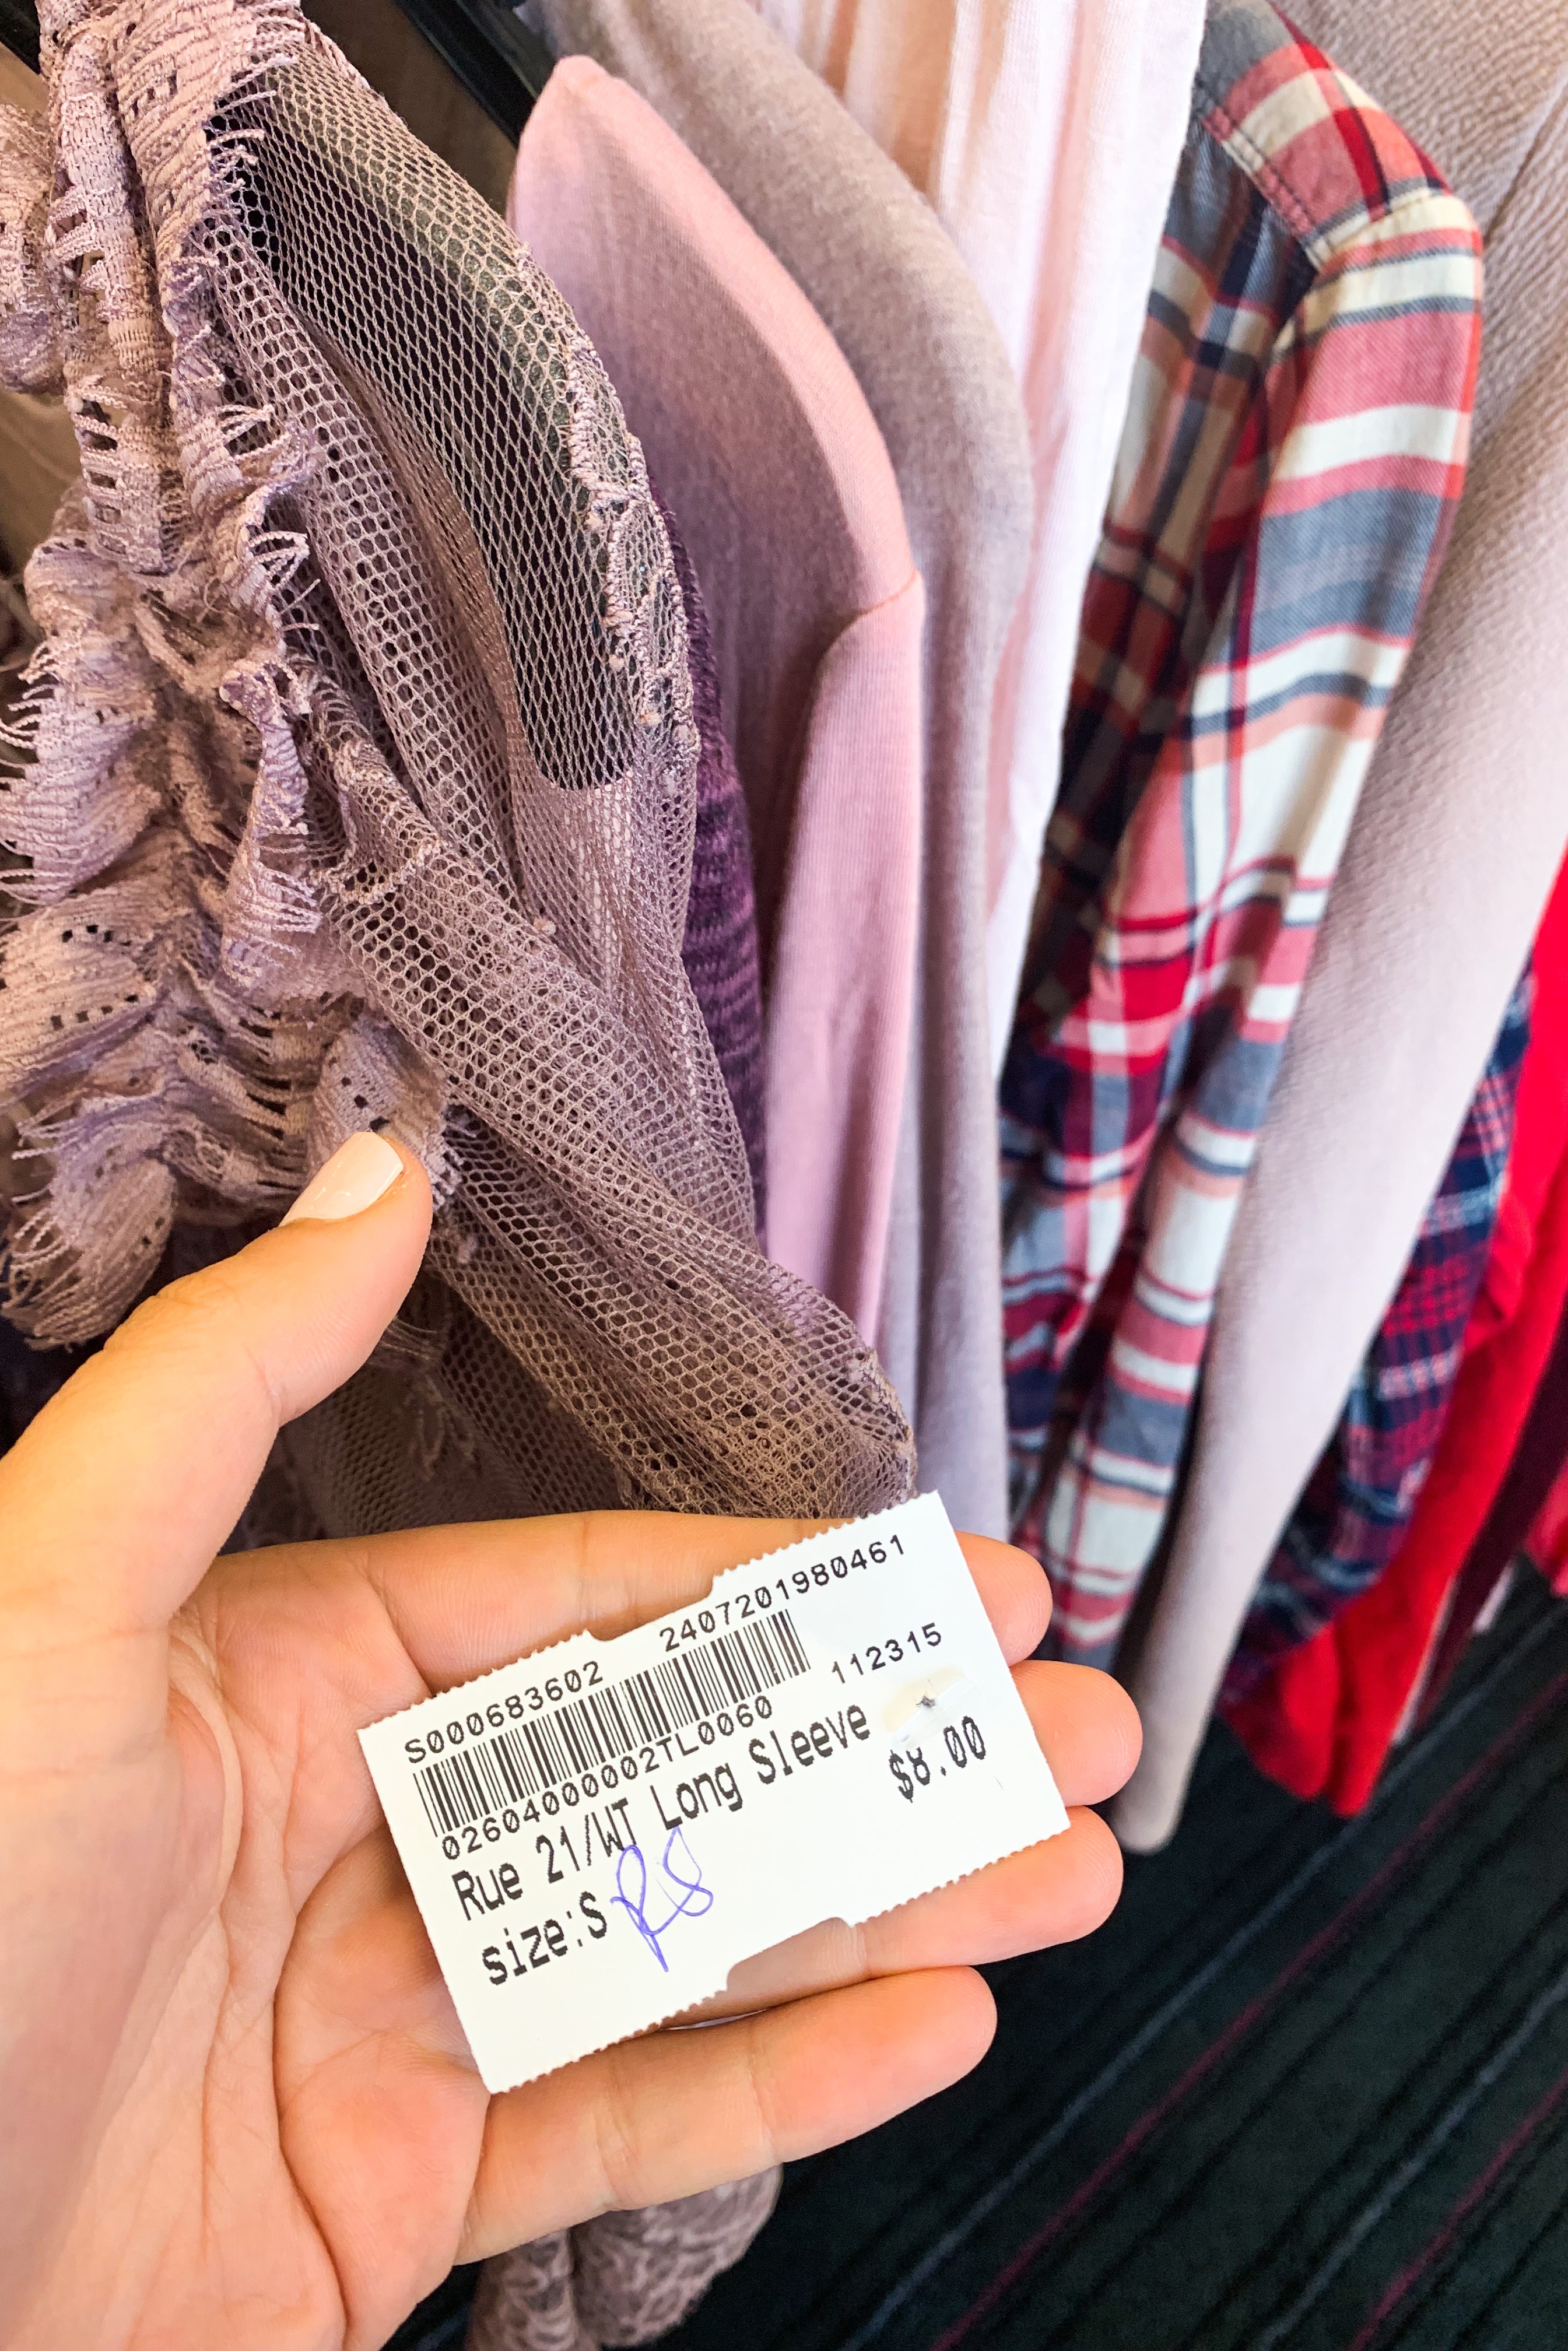 A Reseller's Guide to Plato's Closet with a Bonus Shopping Haul